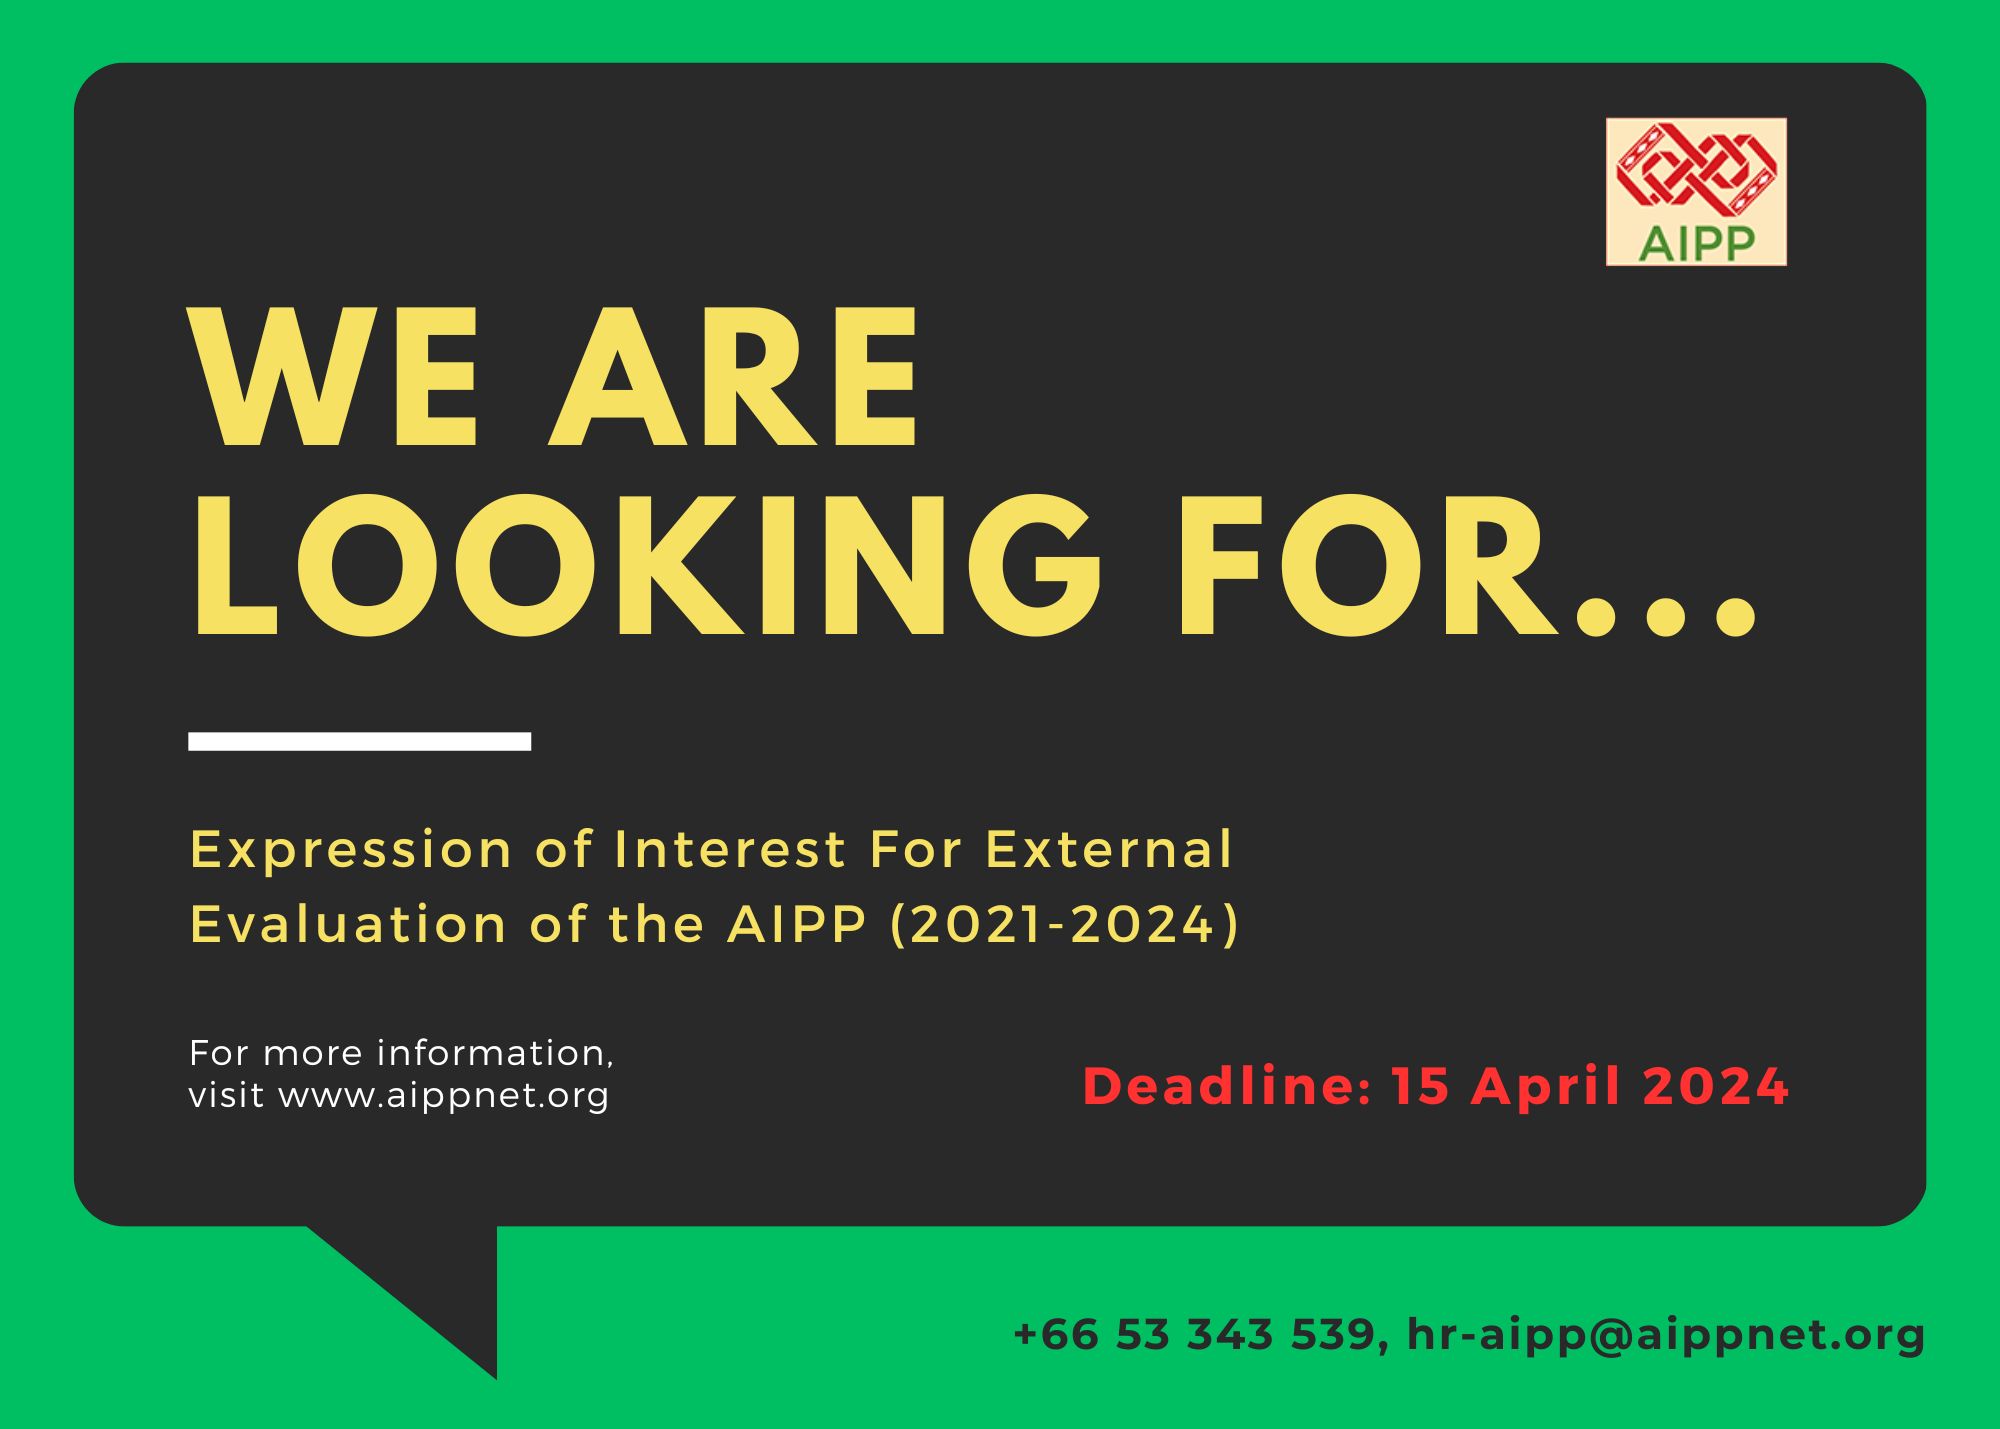 expression of interest external evaluation of AIPP